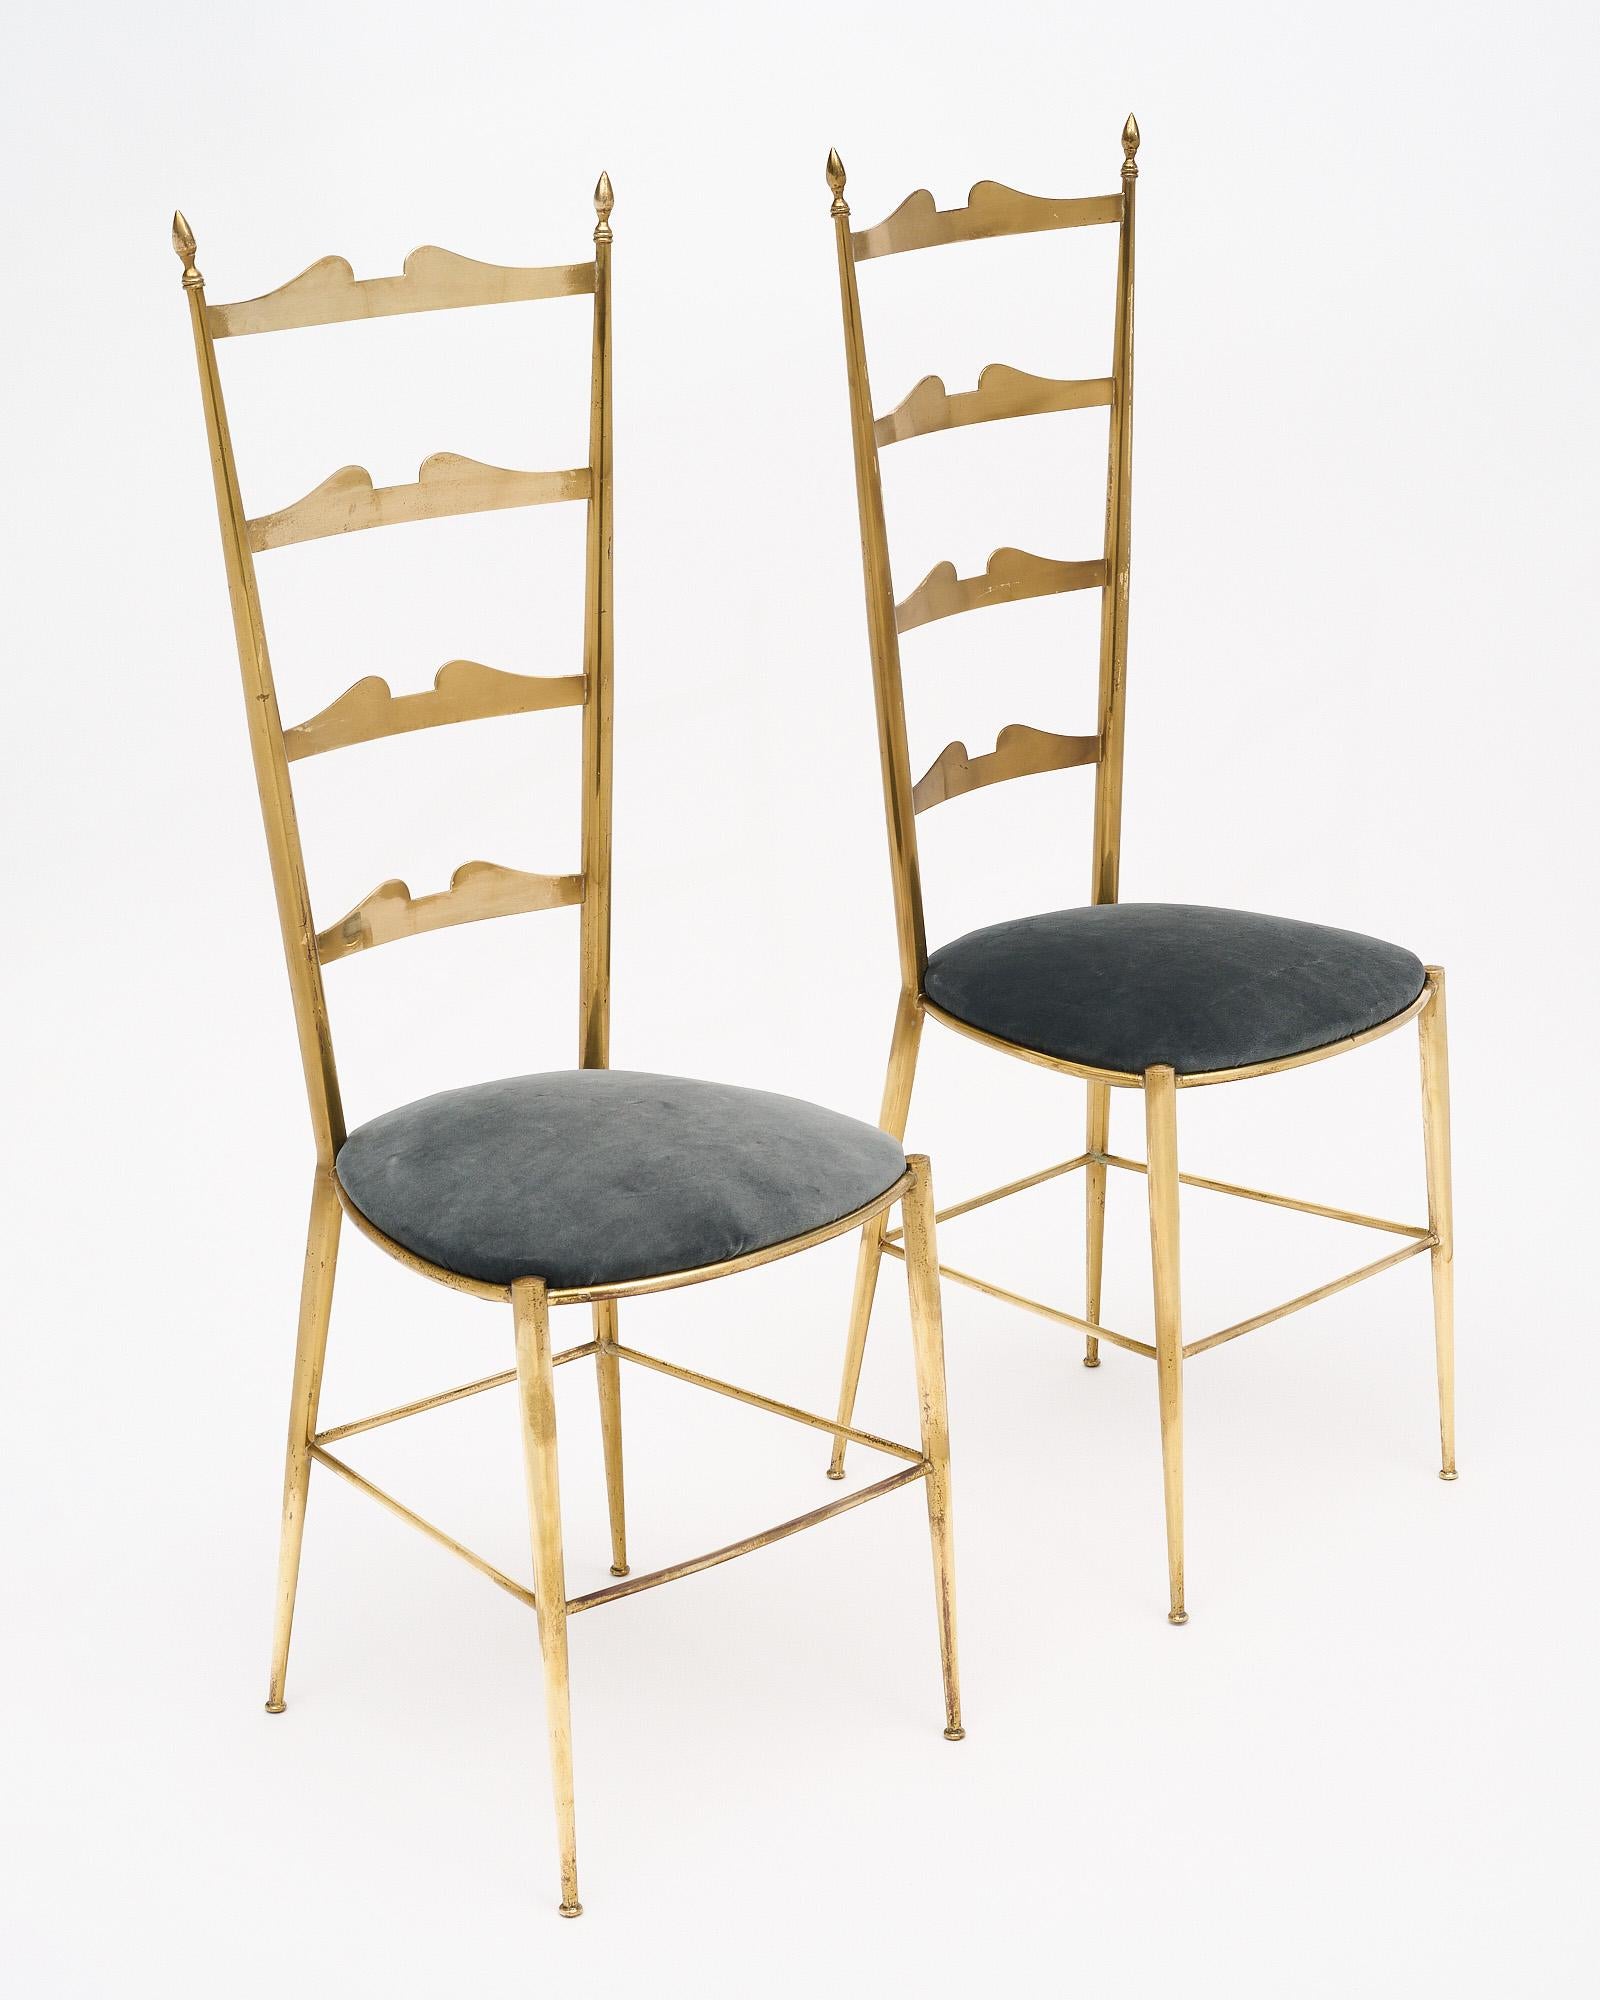 Pair of high backed chairs from Italy made of solid gilded brass with newly upholstered seats in a gray velvet blend. Chiavari chairs are named for the Italian city where they originated. The little town is located between Genoa and Cinque Terre and